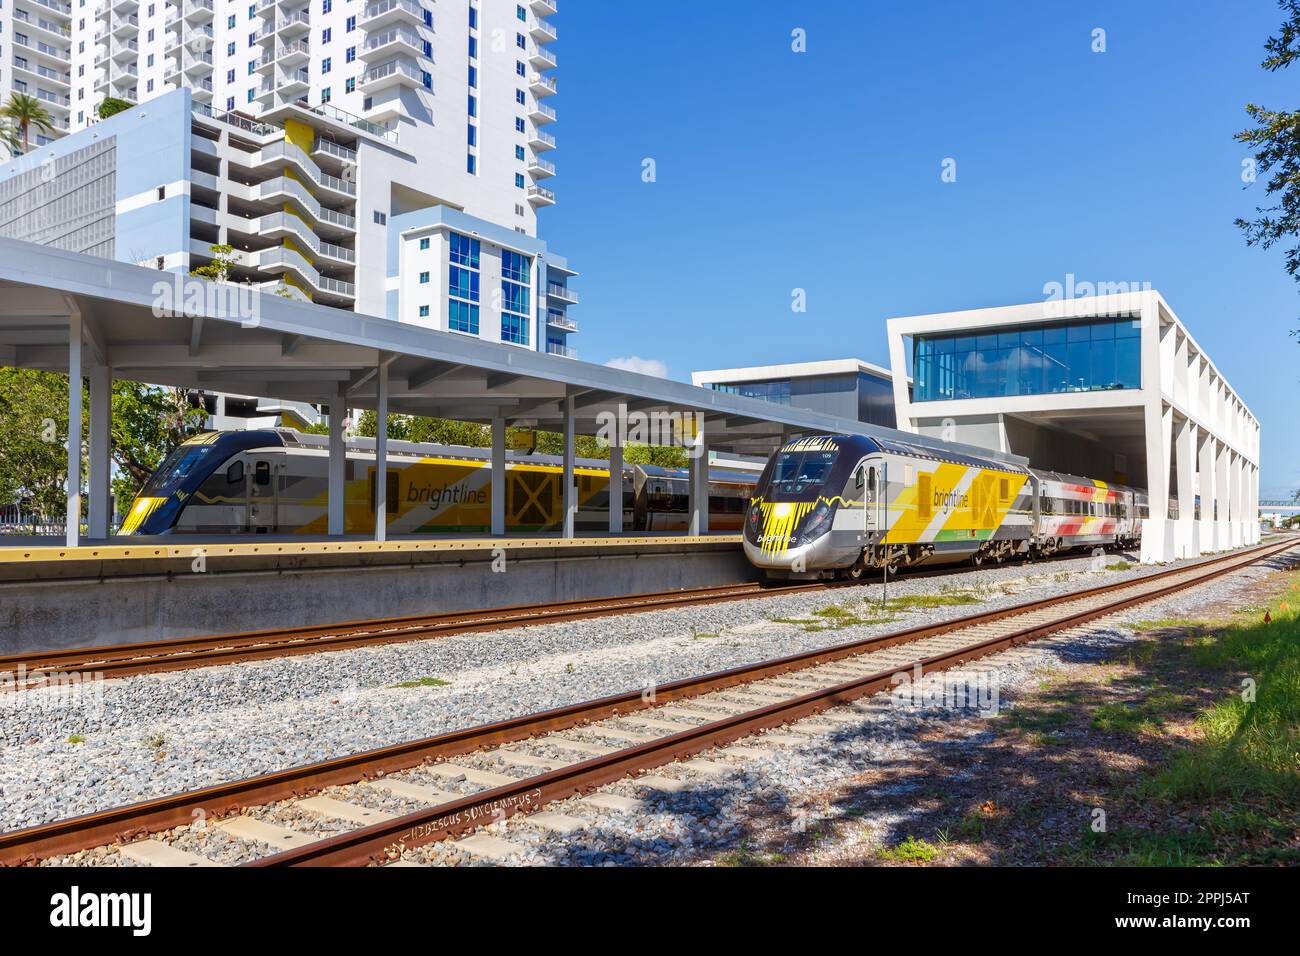 Brightline private inter-city rail train at West Palm Beach railway station in Florida, United States Stock Photo